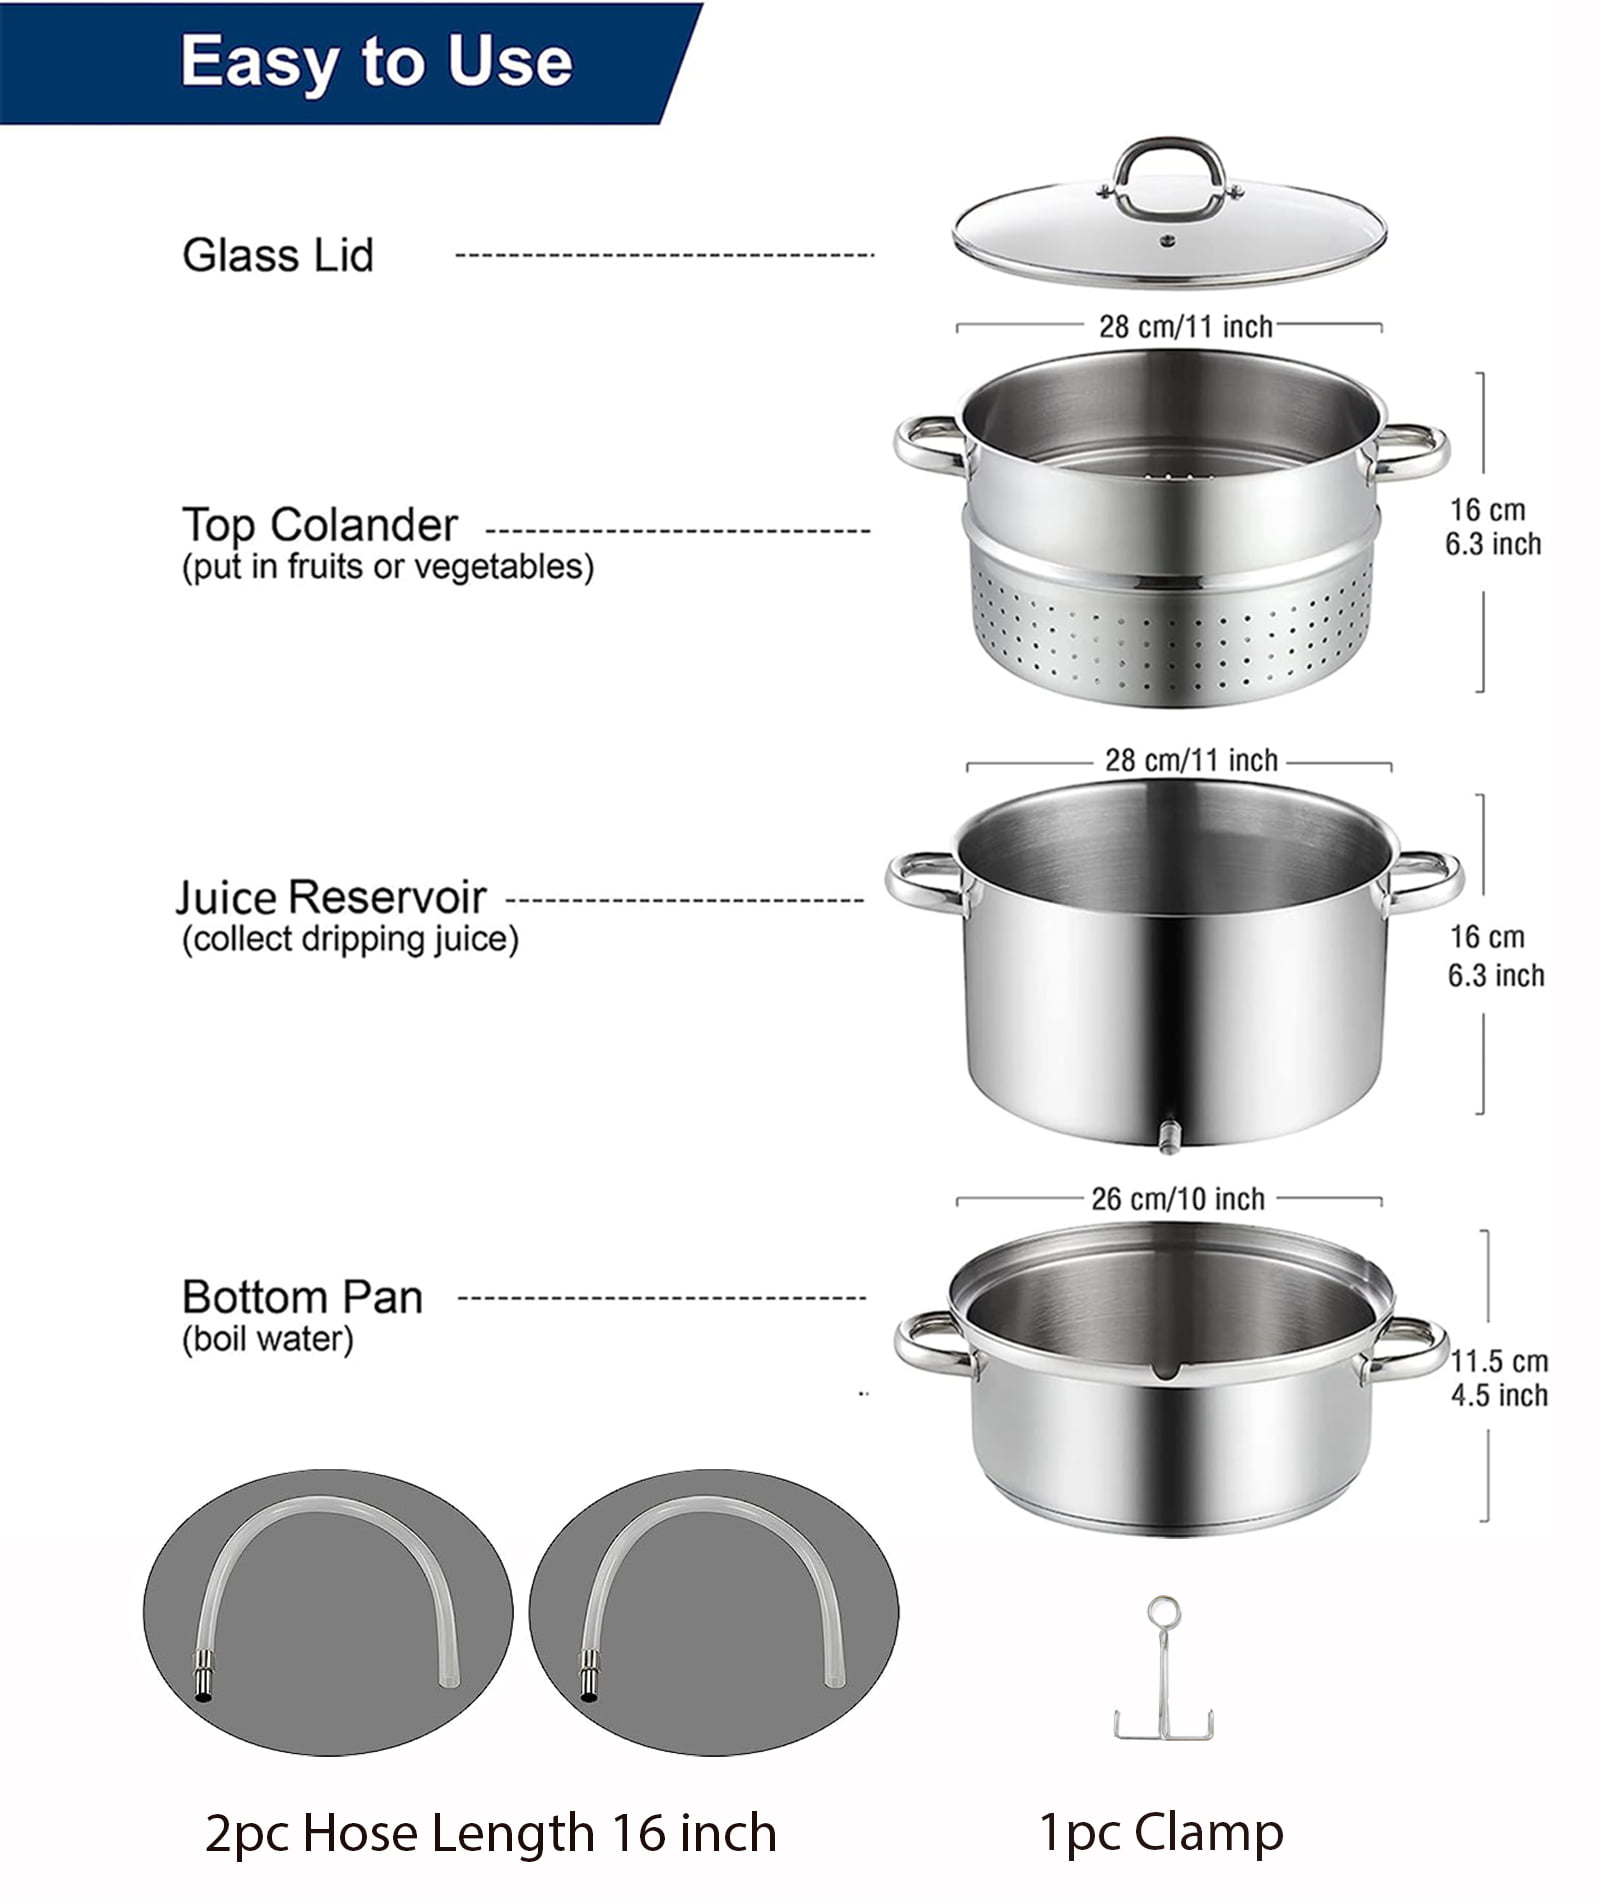 Cooks Standard Canning Juice Steamer Extractor Fruit Vegetables for Making  Jelly, Sauces, 11-Quart Stainless Steel Multipot with Glass Lid, Clamp, and